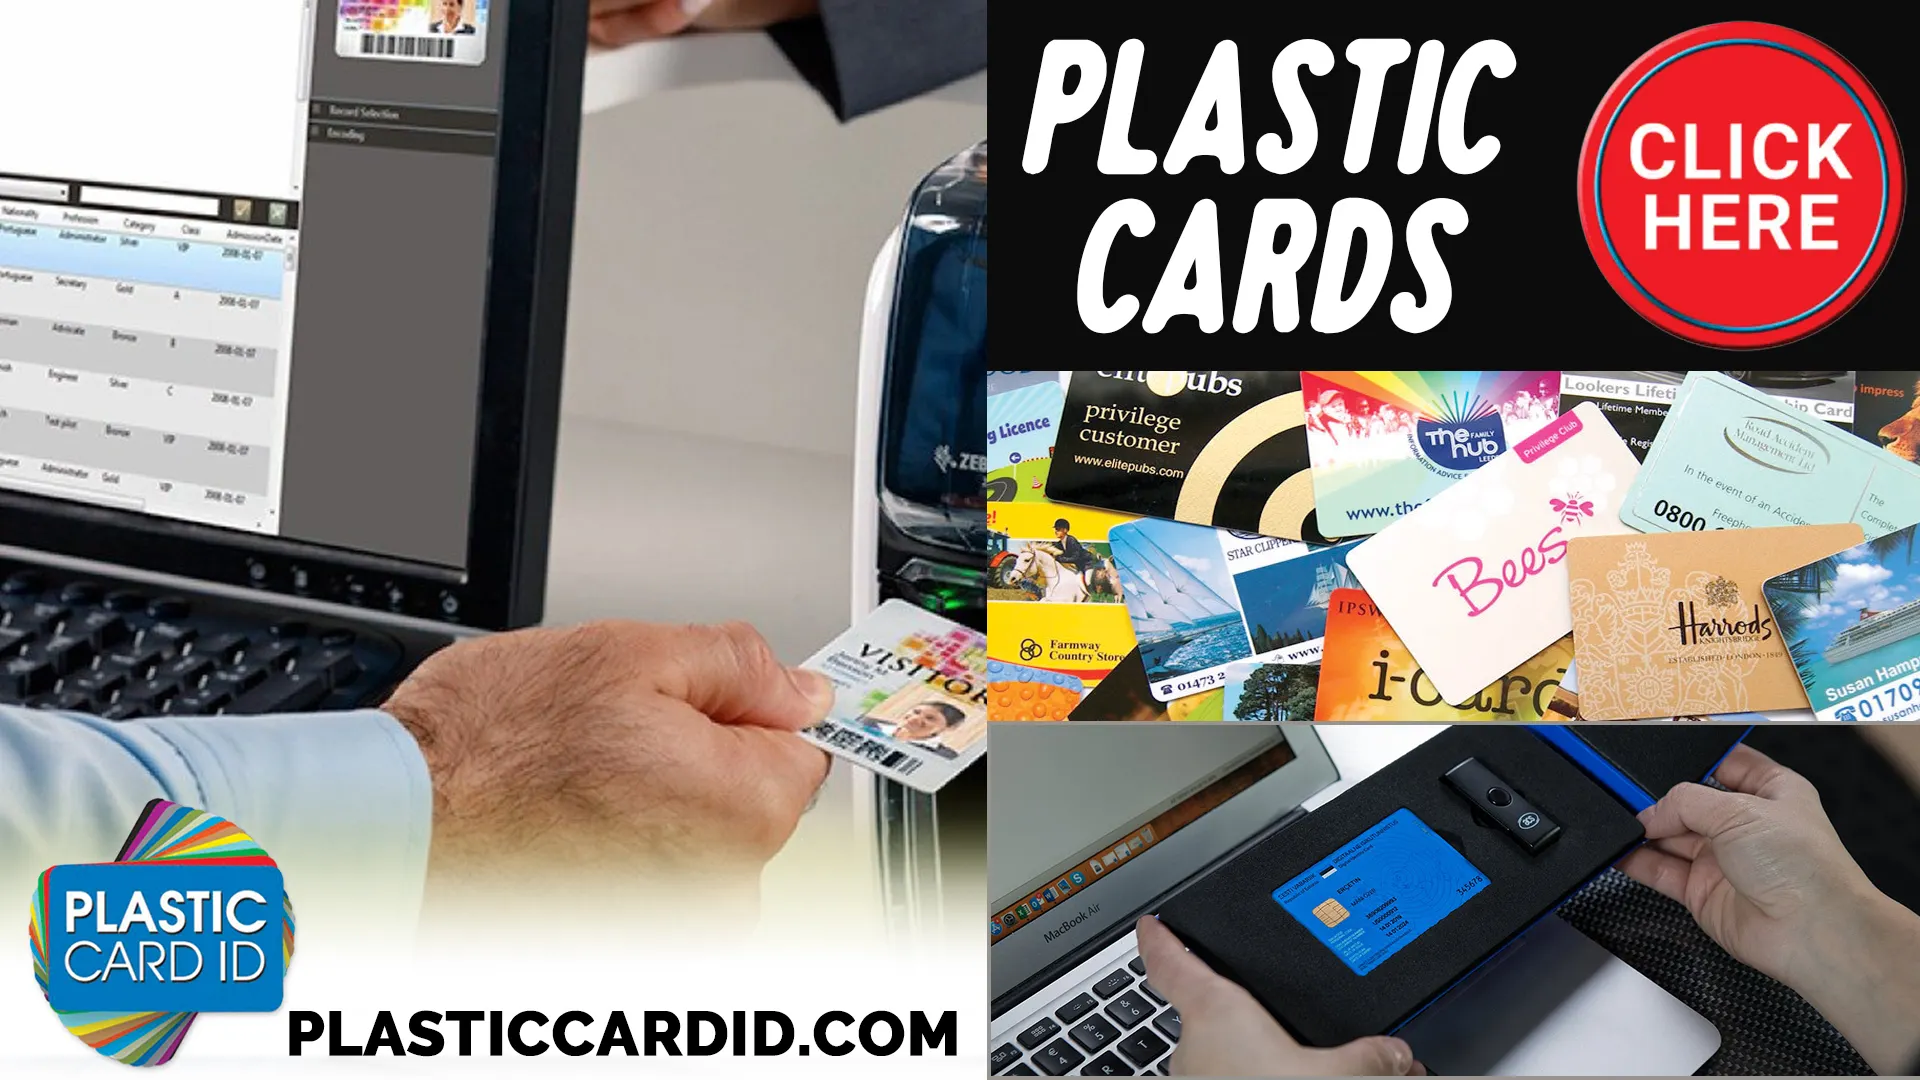 Exceptional Services Offered by Plastic Card ID
